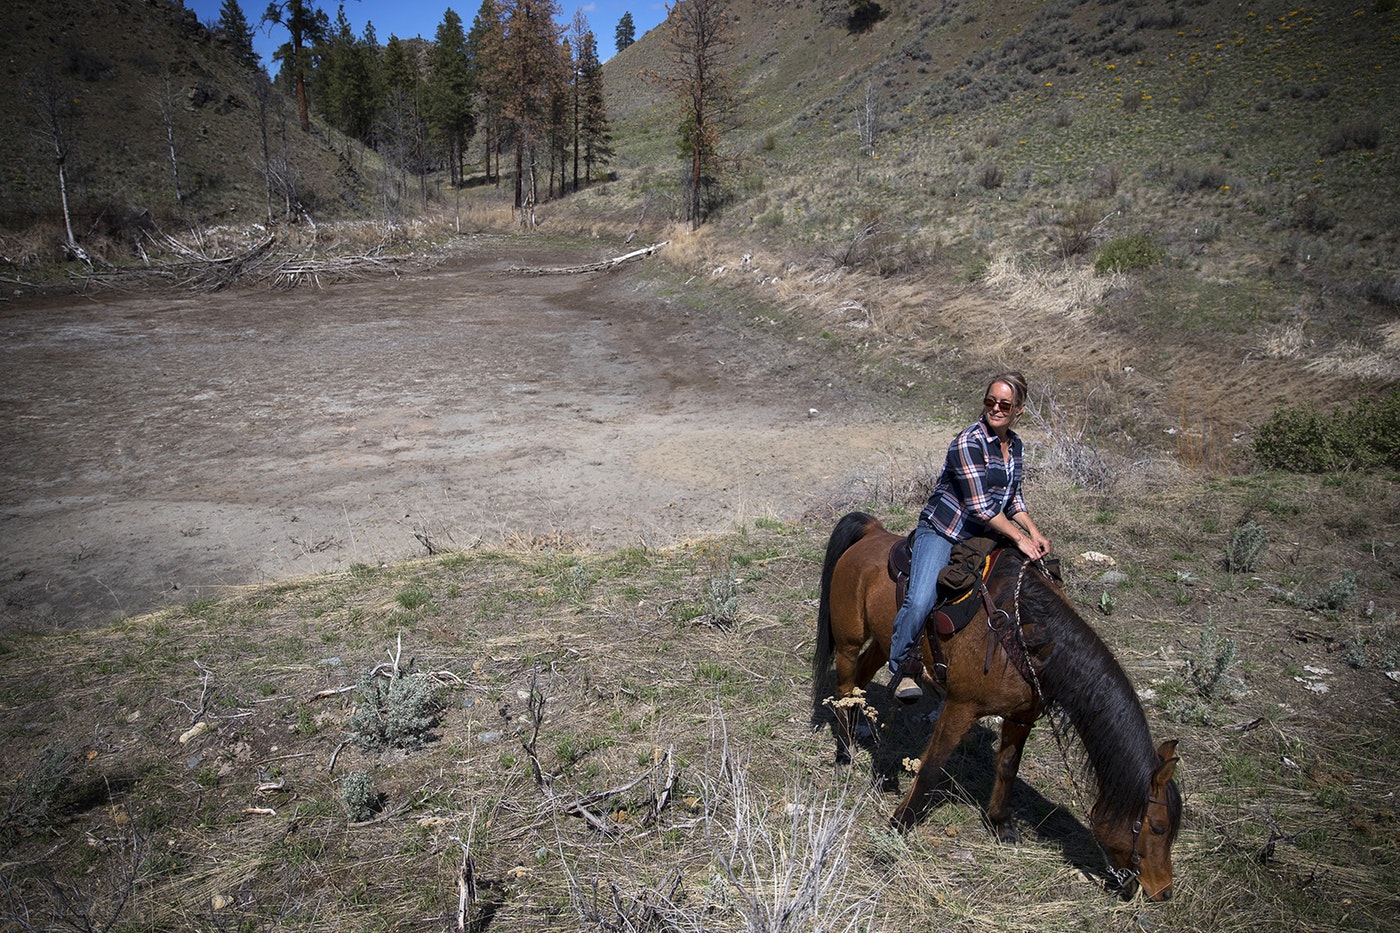 Christina Cline rides her horse, the Big Bad Wolf, next to a dry pond that is typically filled with water, on Tuesday, April 23, 2019, near Carlton, Washington. CREDIT: KUOW PHOTO/MEGAN FARMER